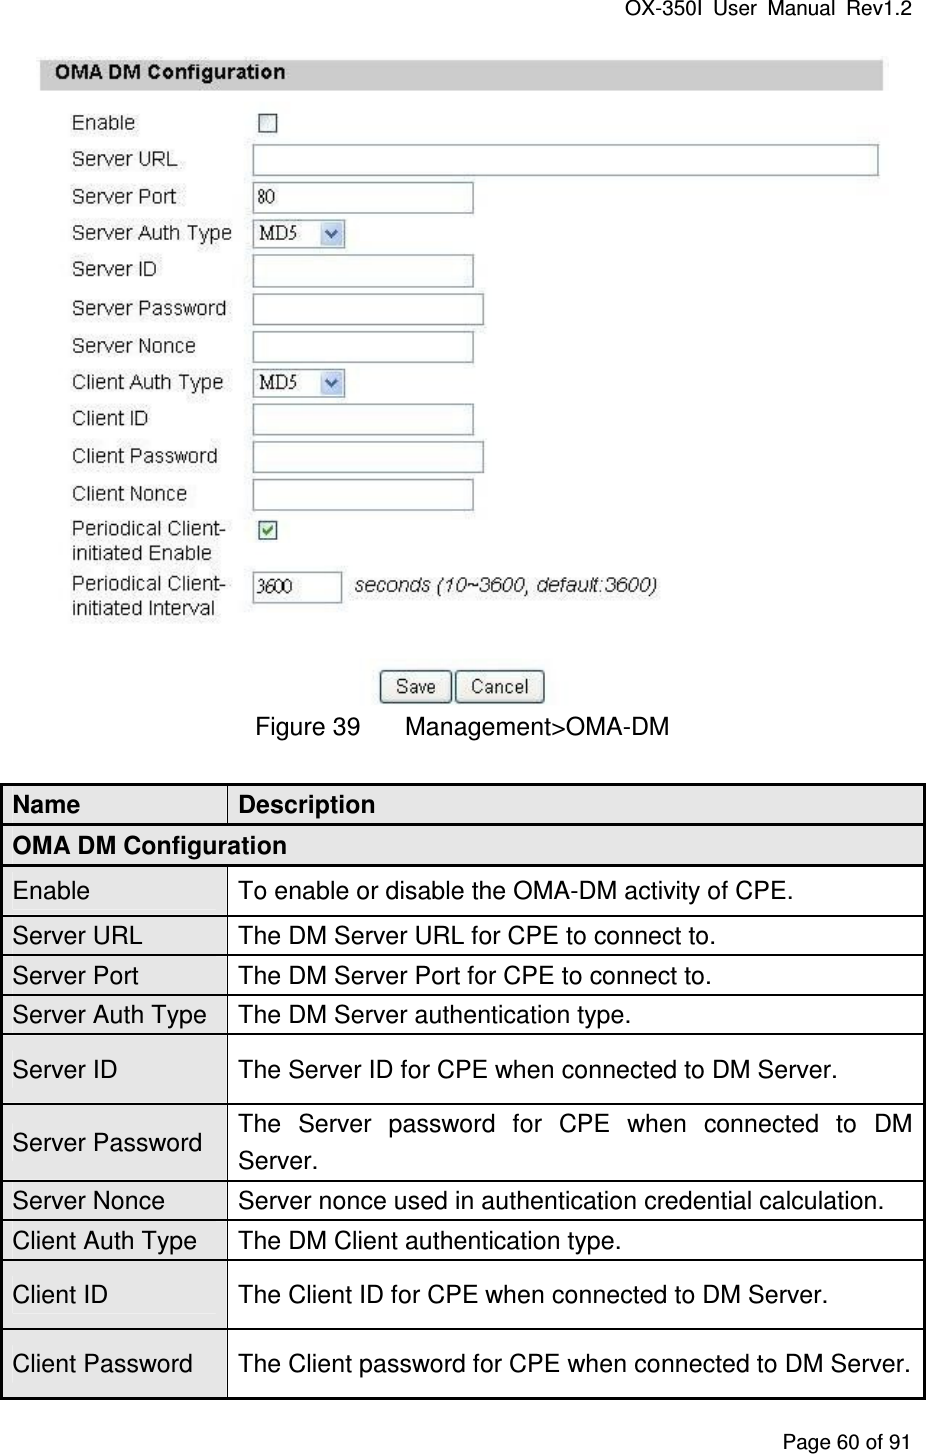 OX-350I  User  Manual  Rev1.2 Page 60 of 91  Figure 39  Management&gt;OMA-DM Name  Description OMA DM Configuration Enable  To enable or disable the OMA-DM activity of CPE. Server URL  The DM Server URL for CPE to connect to. Server Port  The DM Server Port for CPE to connect to. Server Auth Type  The DM Server authentication type. Server ID  The Server ID for CPE when connected to DM Server. Server Password  The  Server  password  for  CPE  when  connected  to  DM Server. Server Nonce  Server nonce used in authentication credential calculation. Client Auth Type  The DM Client authentication type. Client ID  The Client ID for CPE when connected to DM Server. Client Password  The Client password for CPE when connected to DM Server. 